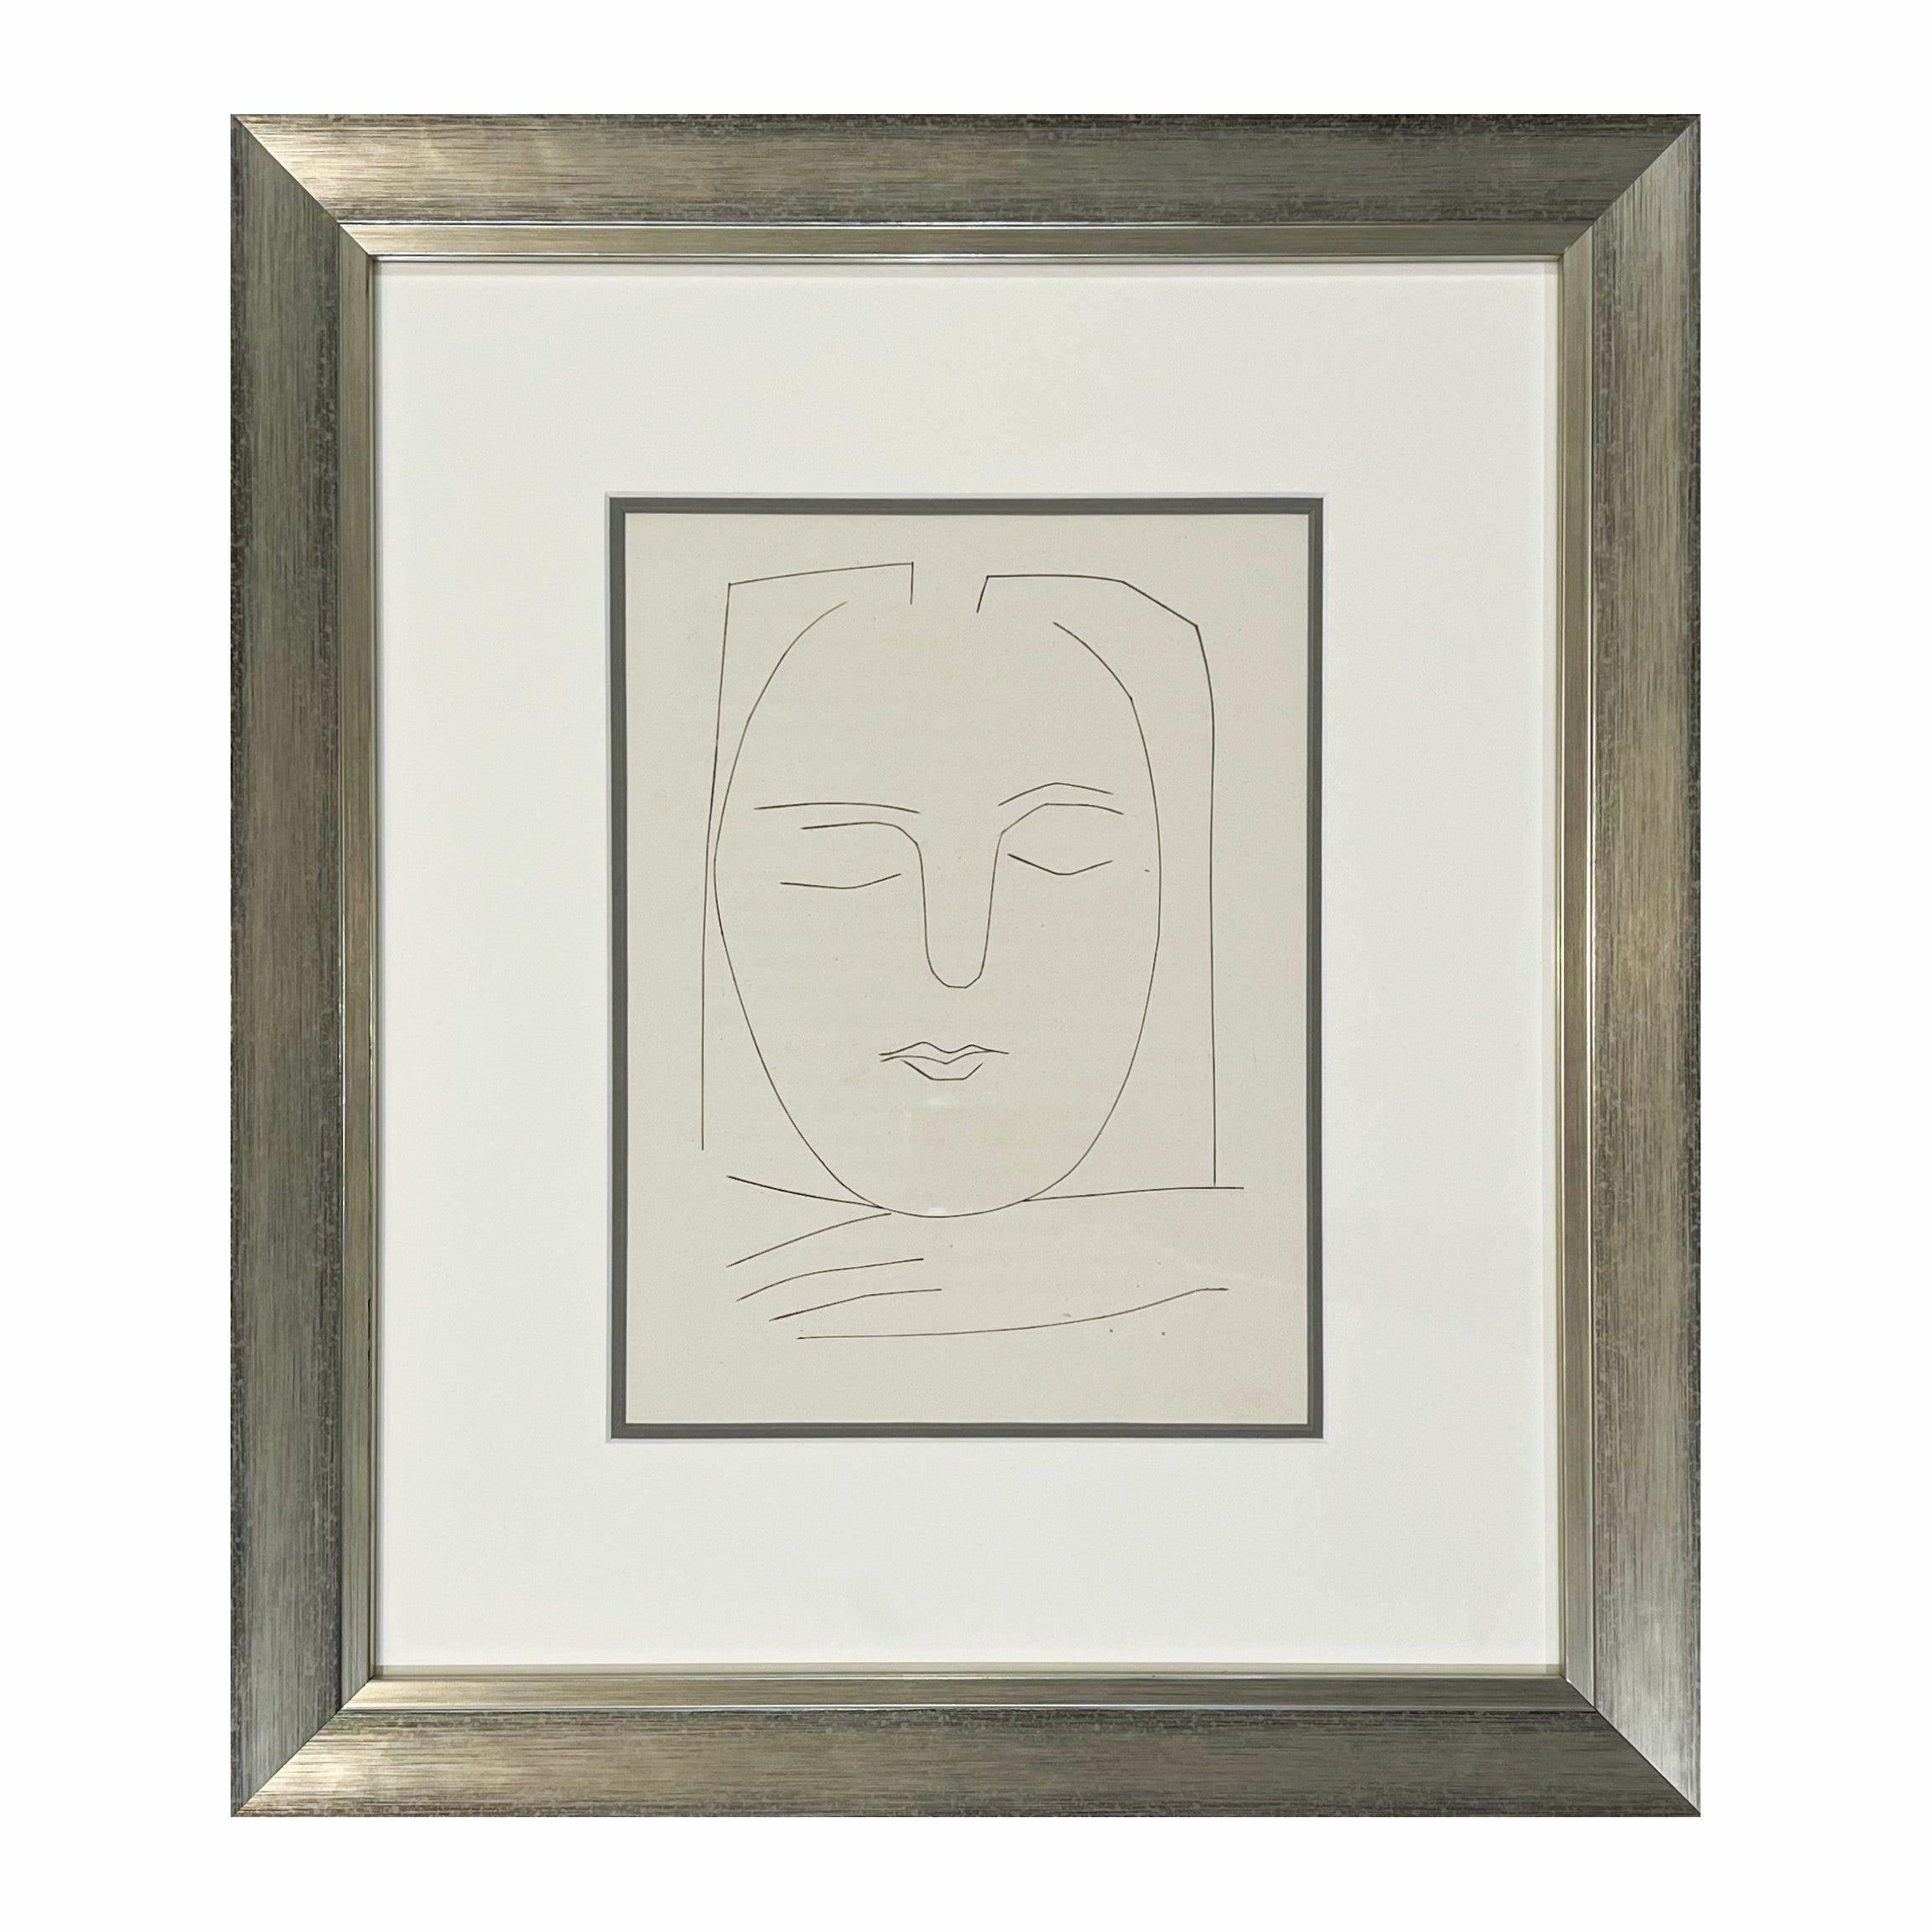 Pablo Picasso, Oval Head of a Woman with Square Hair, Carmen Plate XX 1